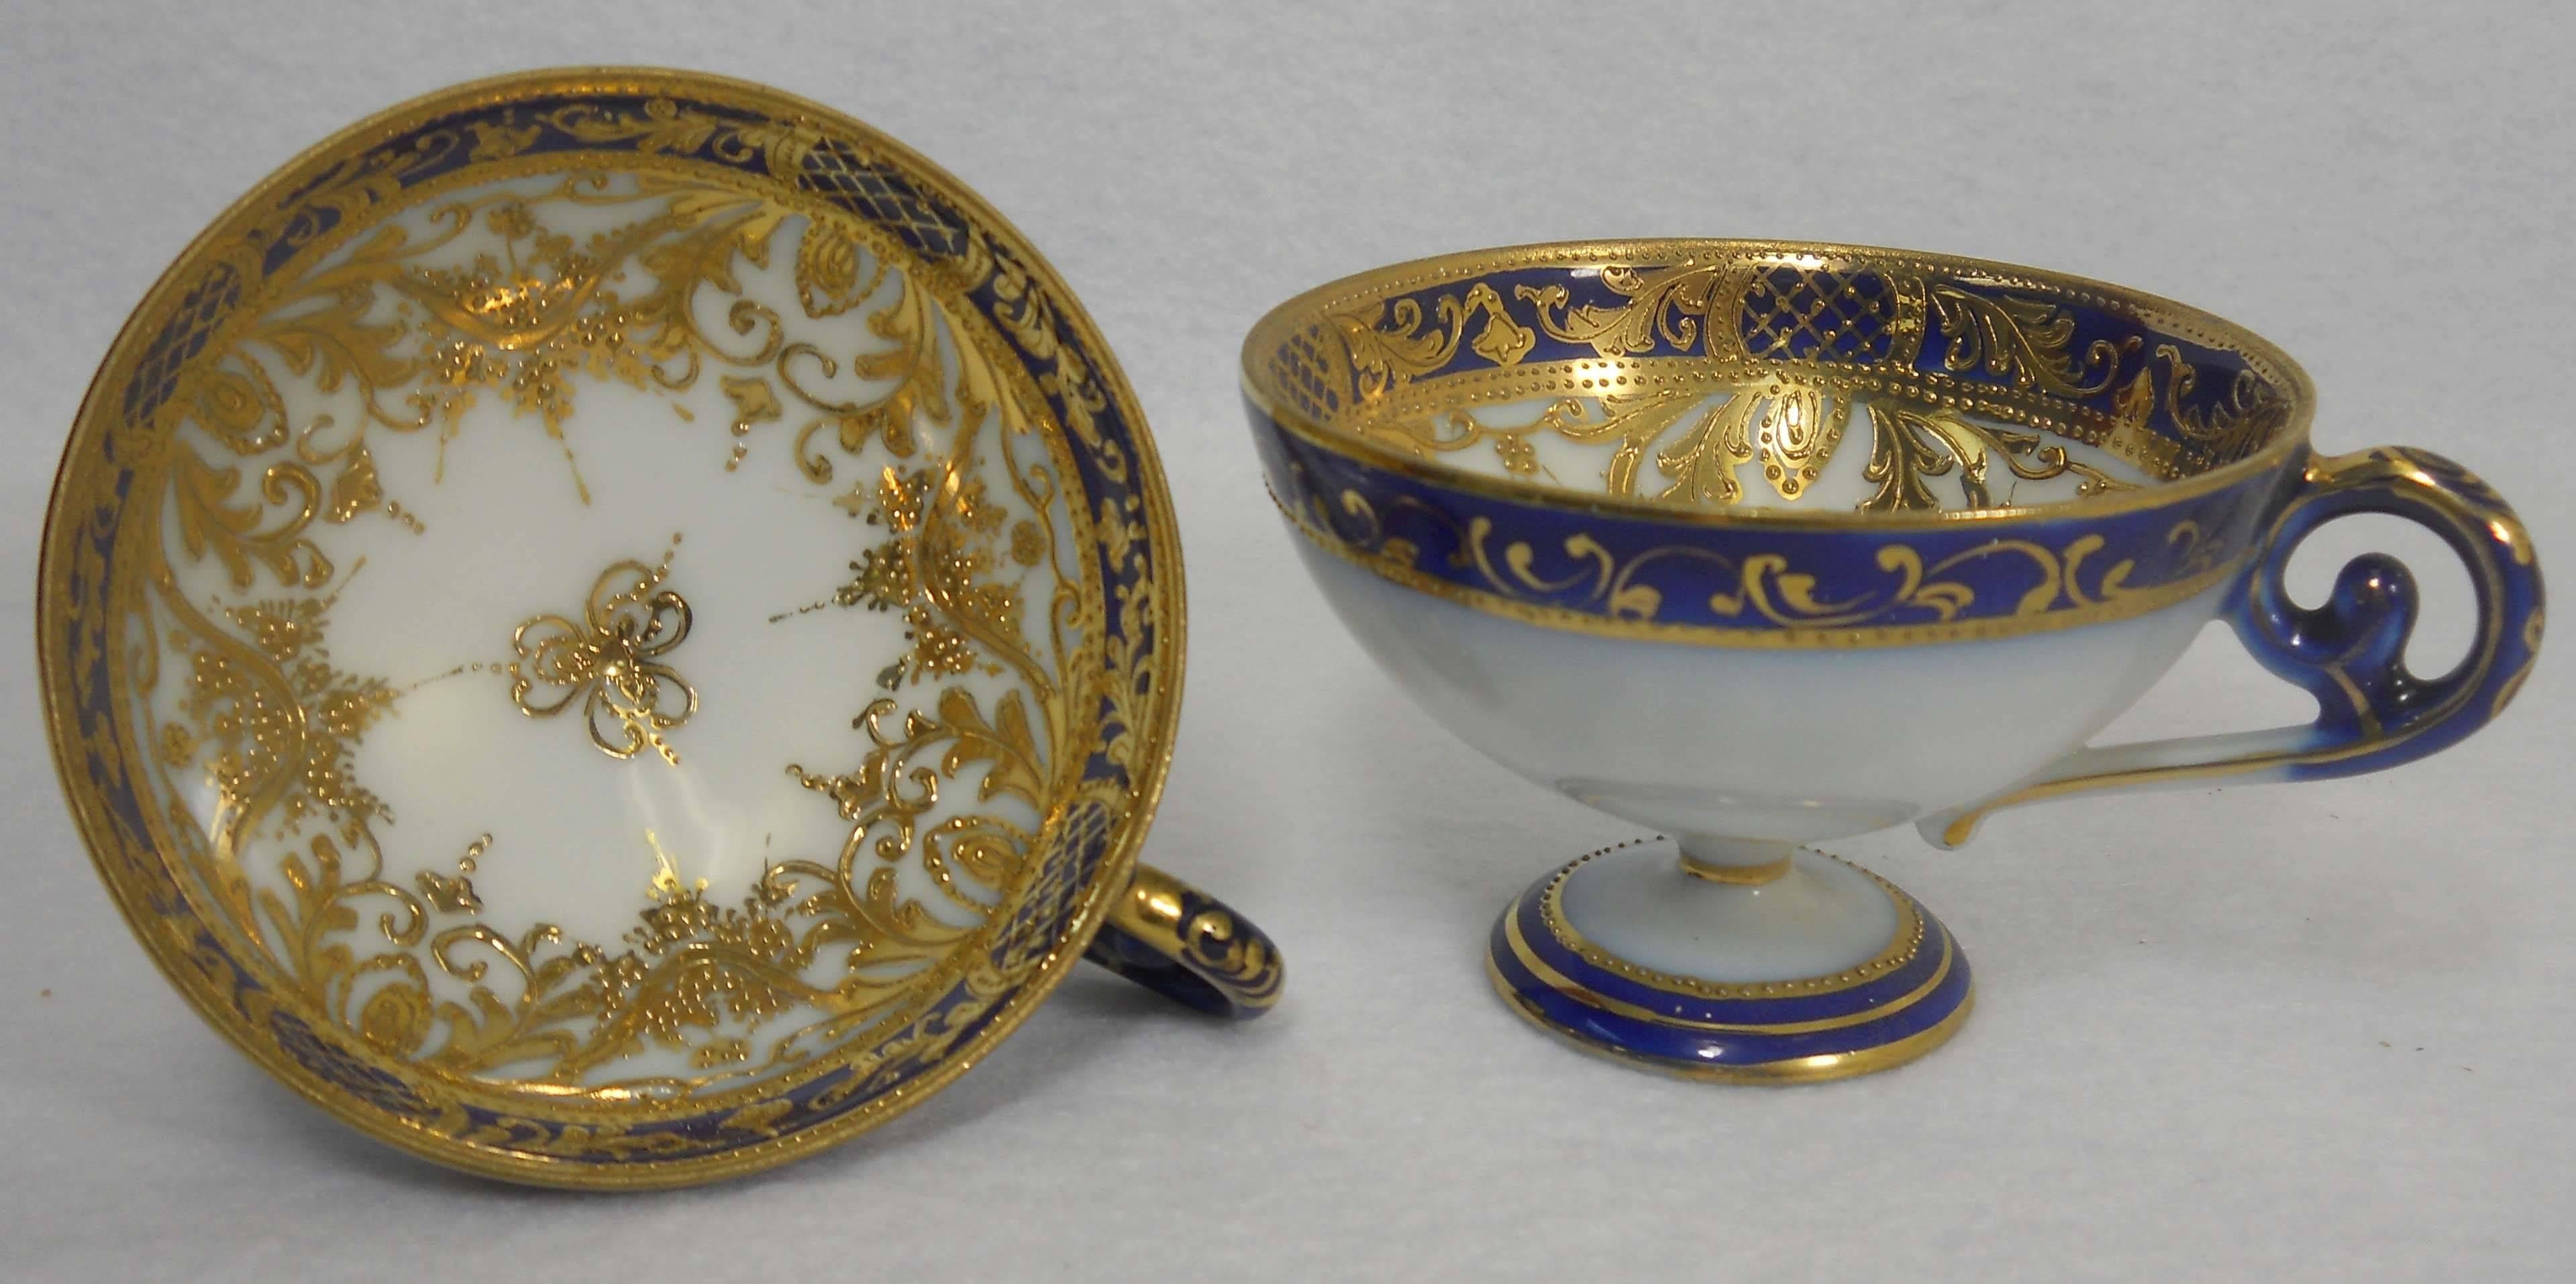 Hand-painted, hand gilded and gilt encrusted tea service, circa 1890s, produced by the Noritake China company. Beautiful condition, set consists of a teapot, creamer, sugar bowl, and six cup and saucer sets.